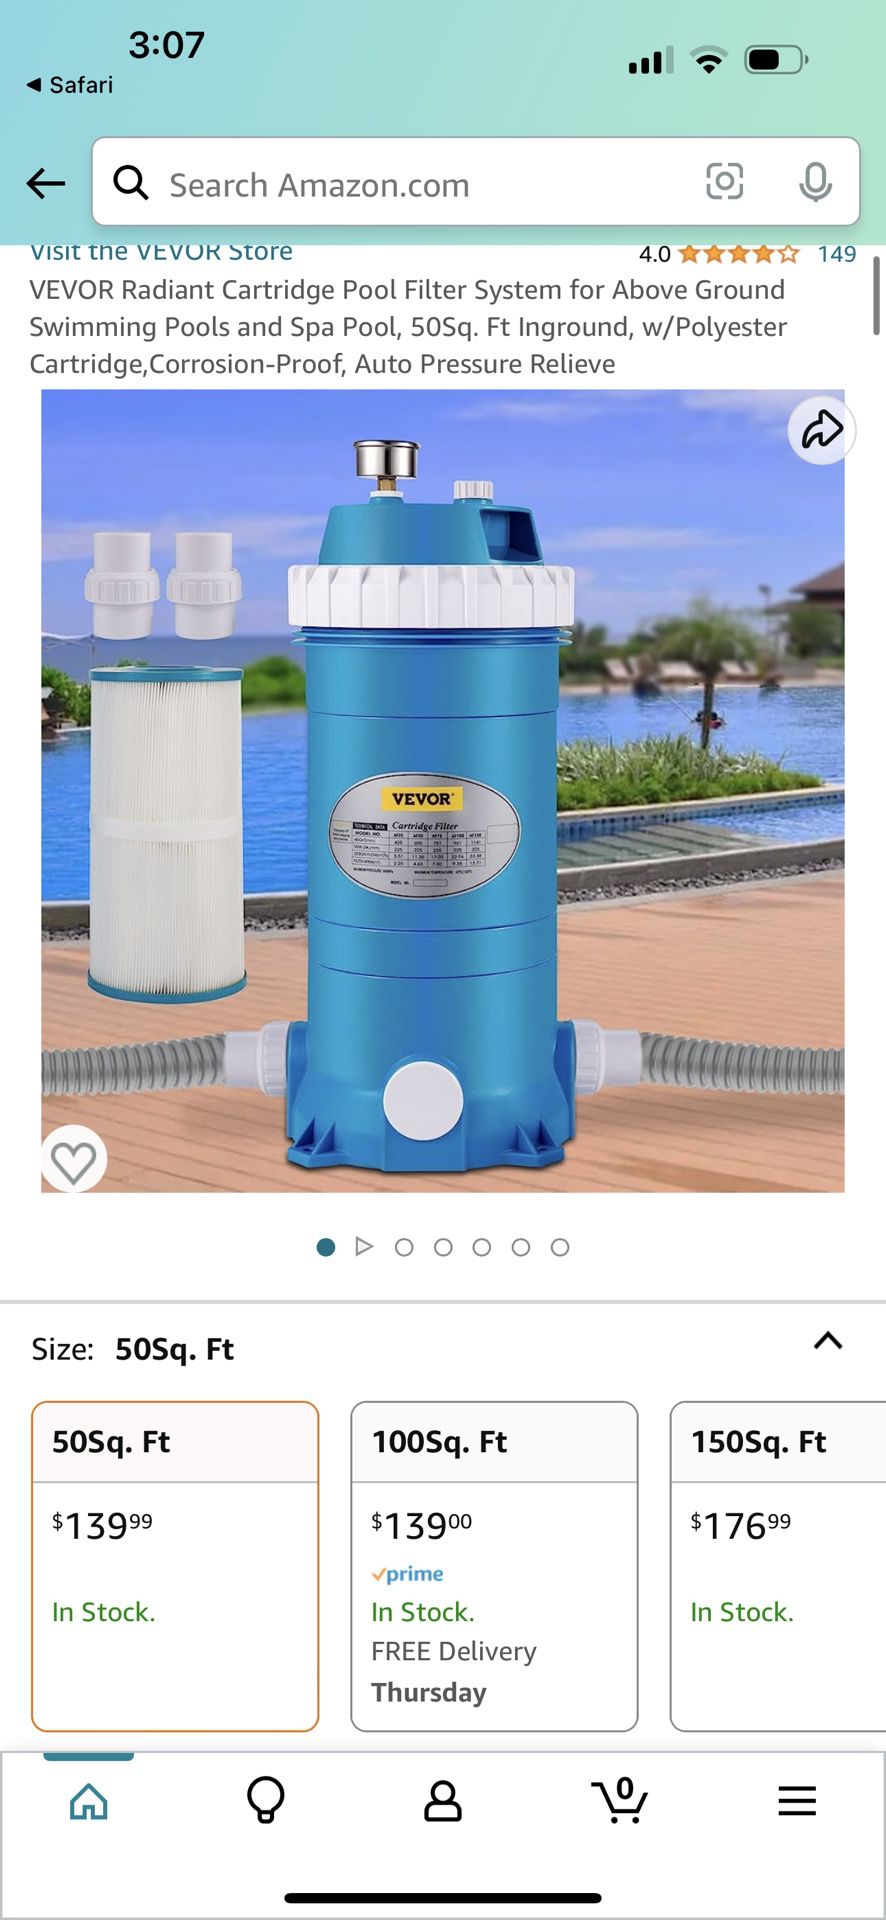 VEVOR Radiant Cartridge Pool Filter System for Above Ground Swimming Pools and Spa Pool (As Is)